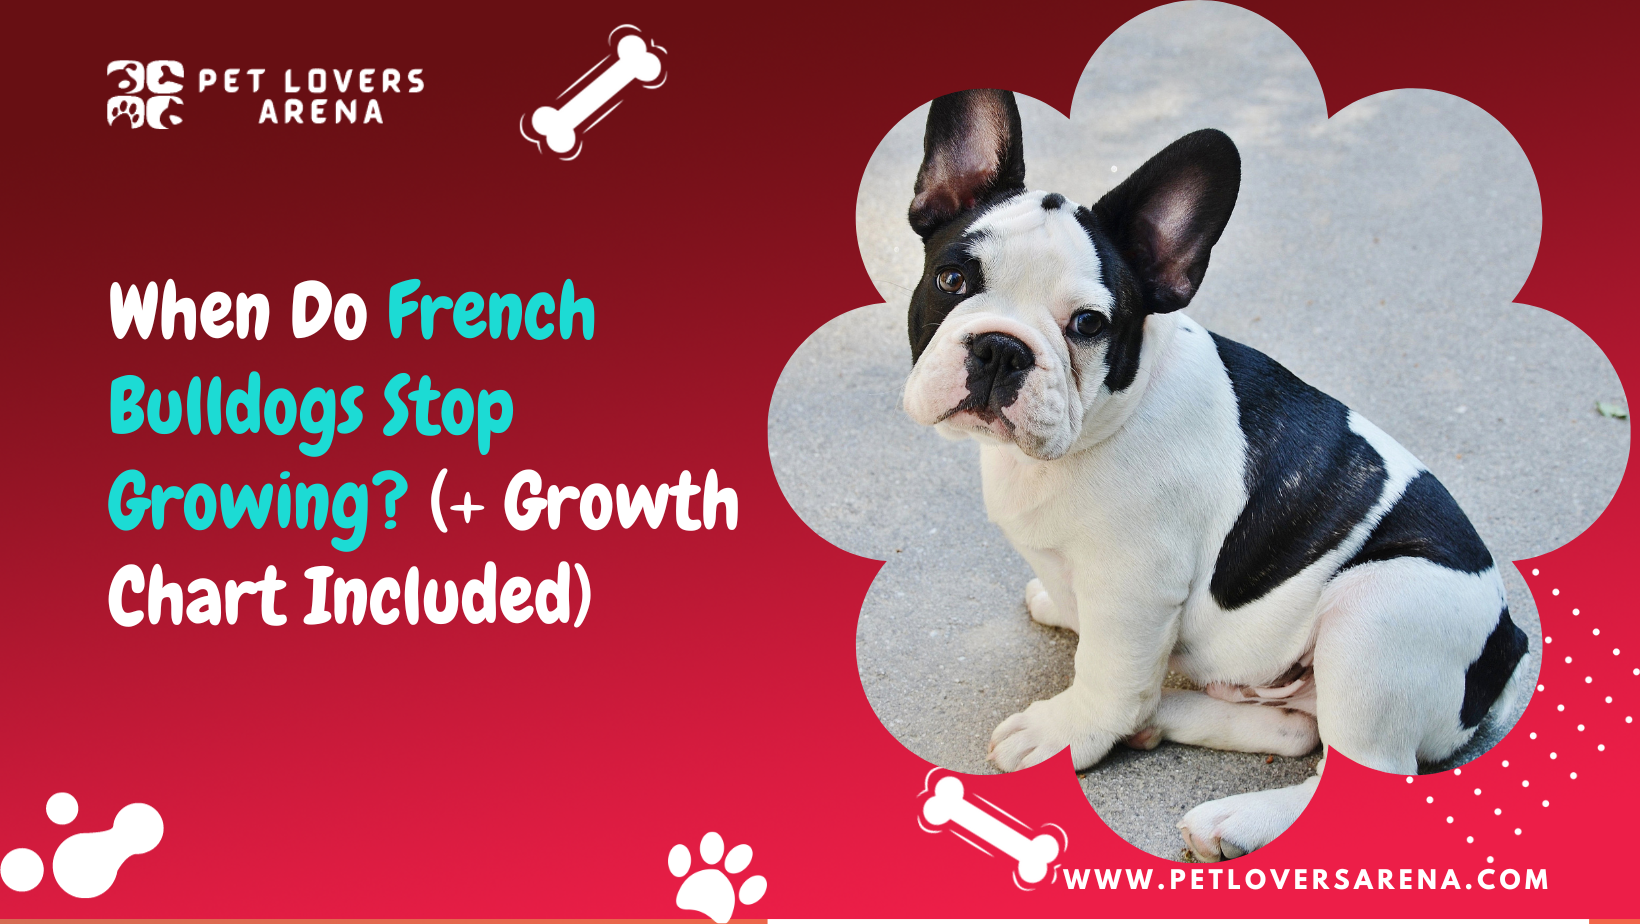 When Do French Bulldogs Stop Growing?